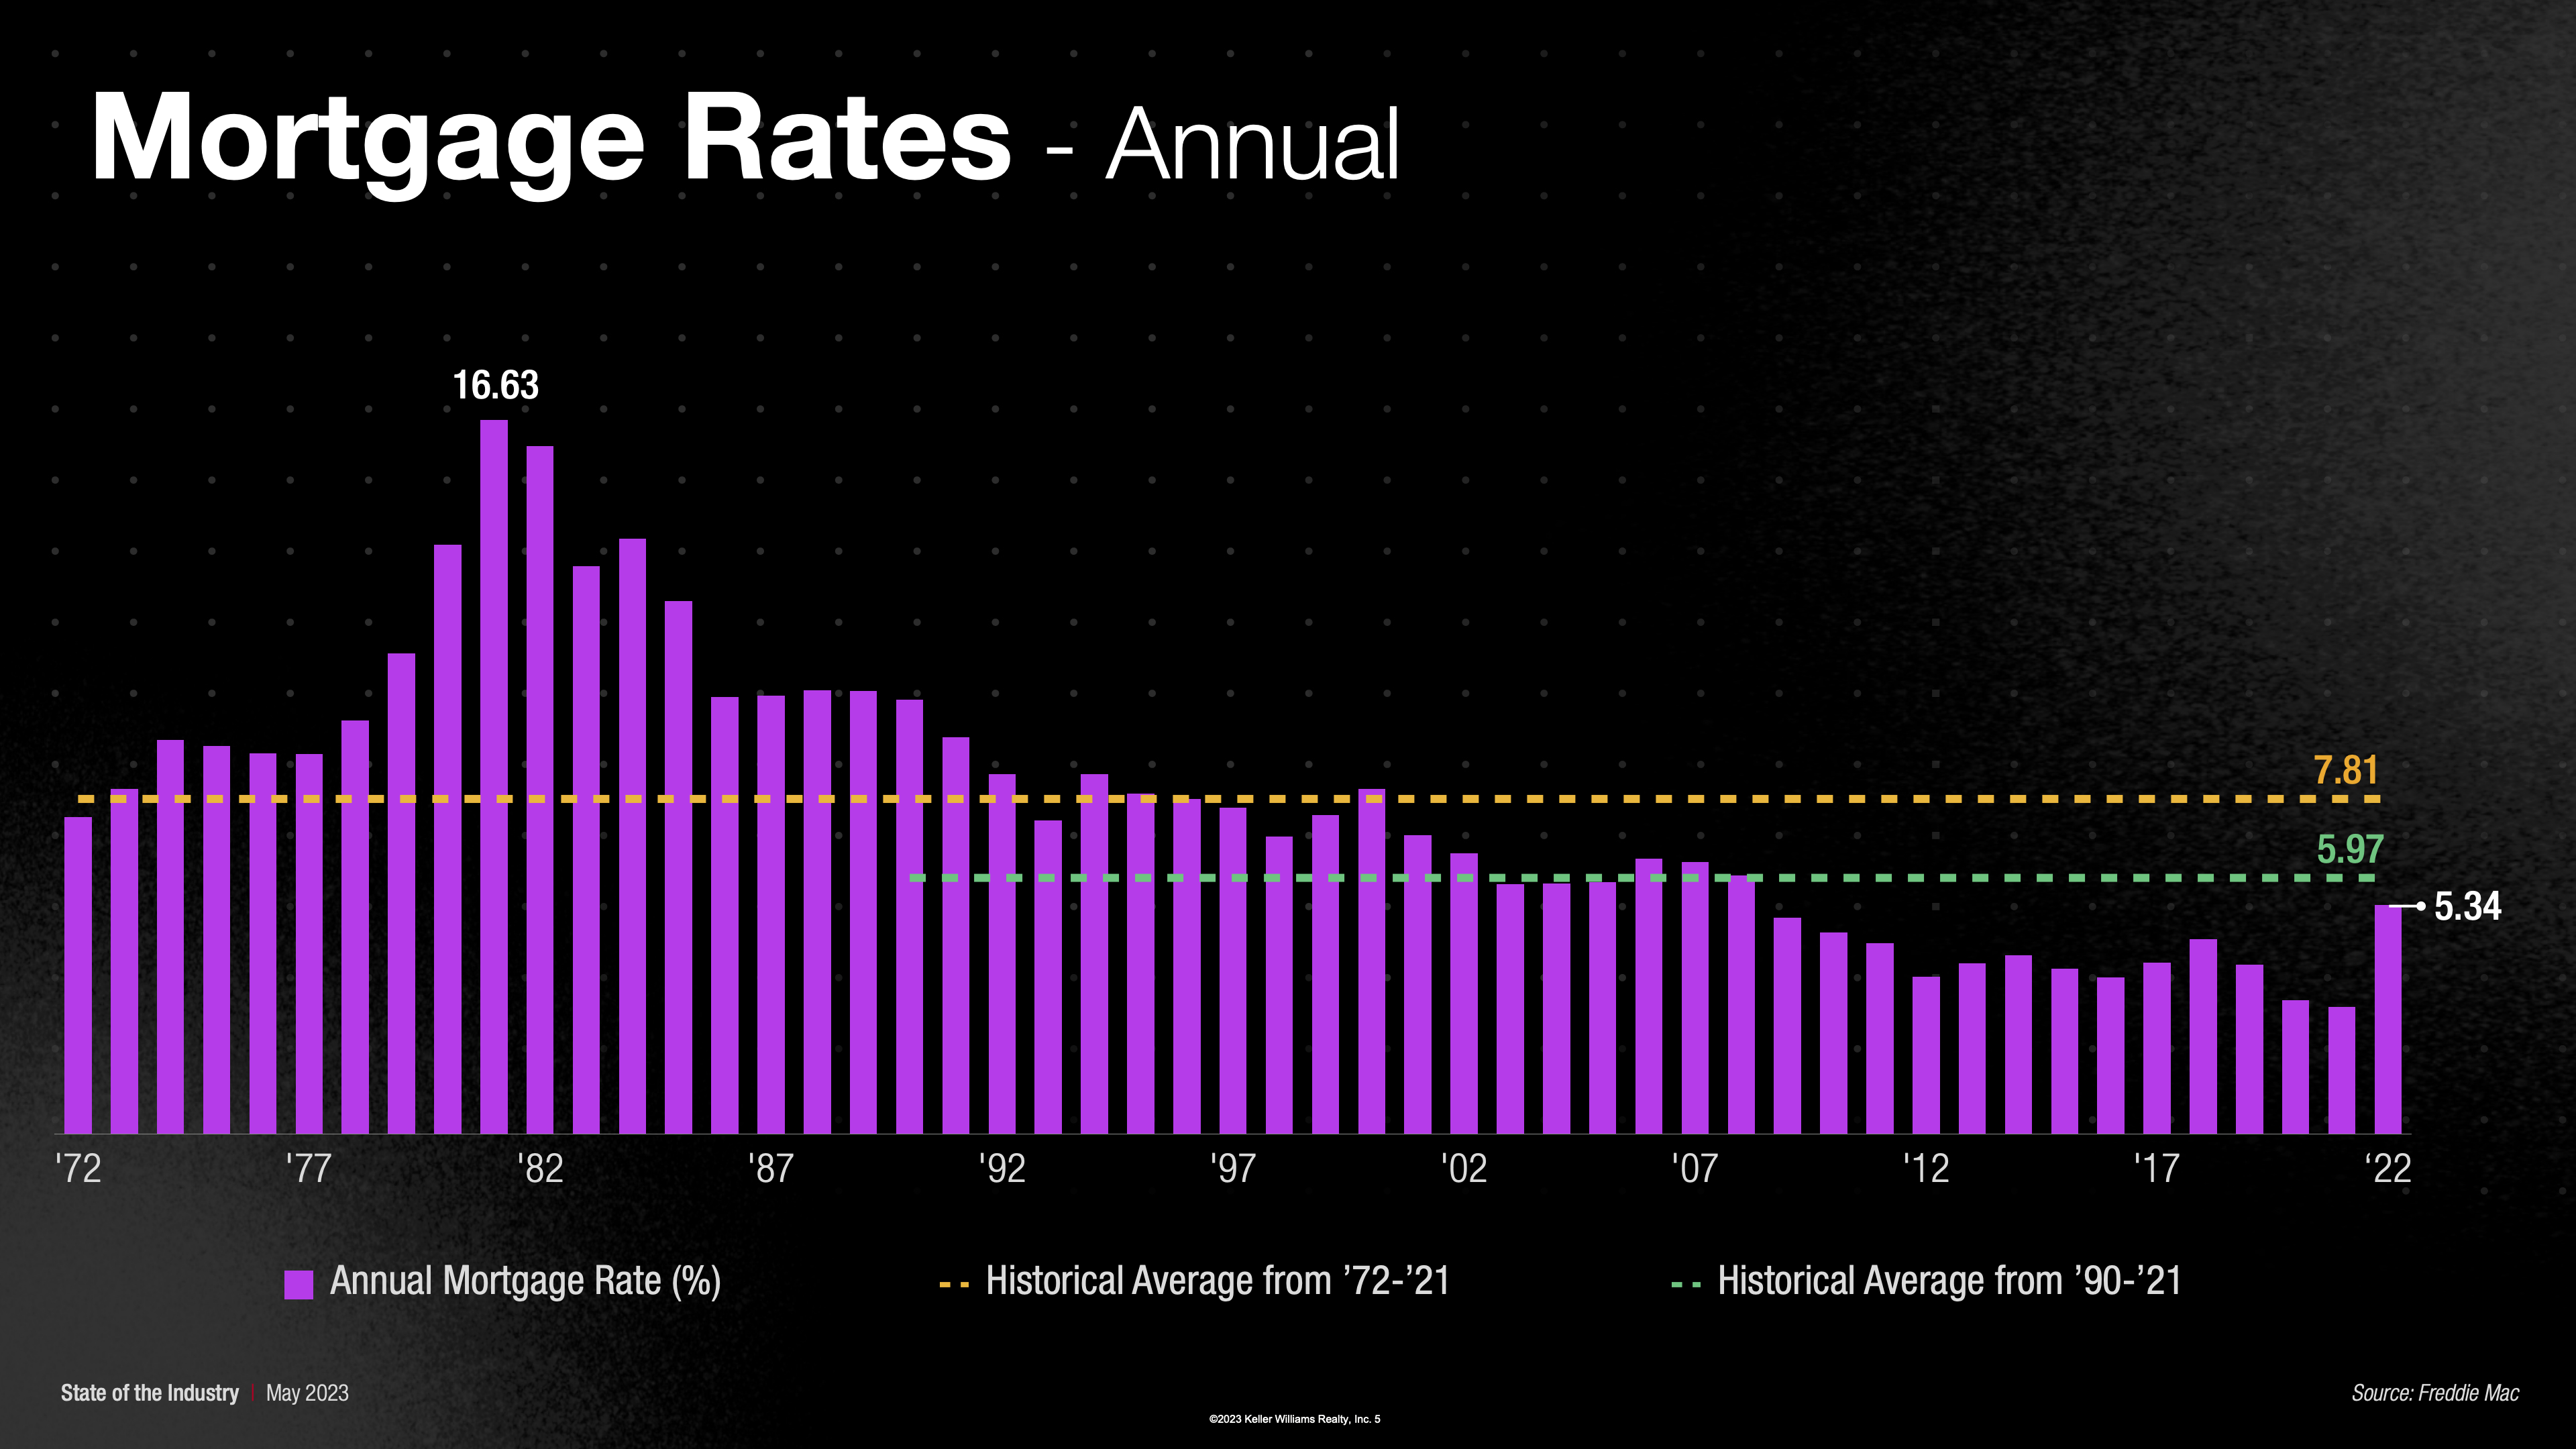 Annual Mortgage Rates from 1972-2022